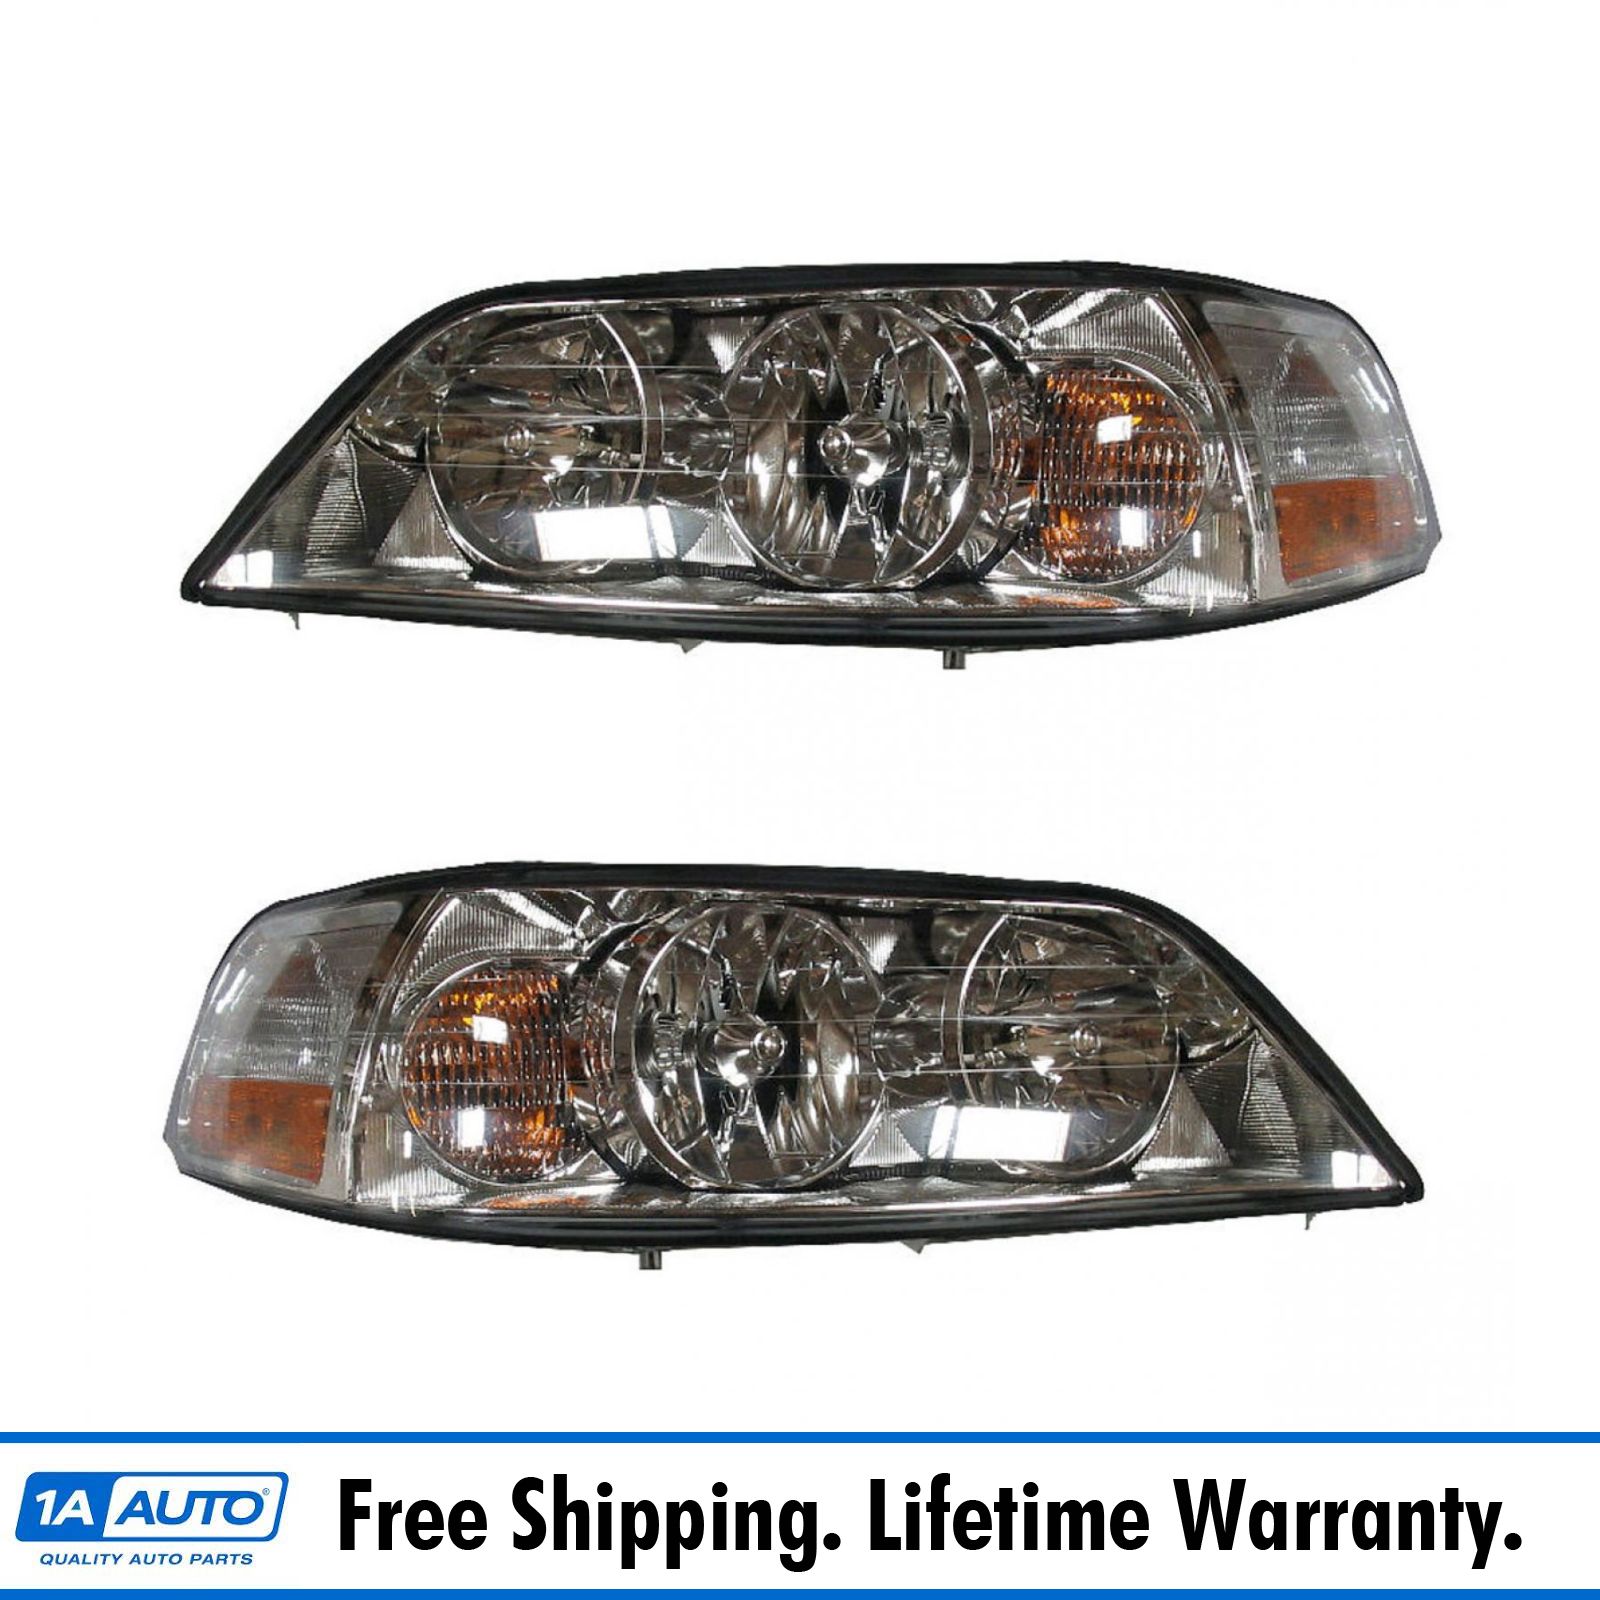 Headlights Headlamps Left & Right Pair Set NEW for 03-04 Lincoln Town